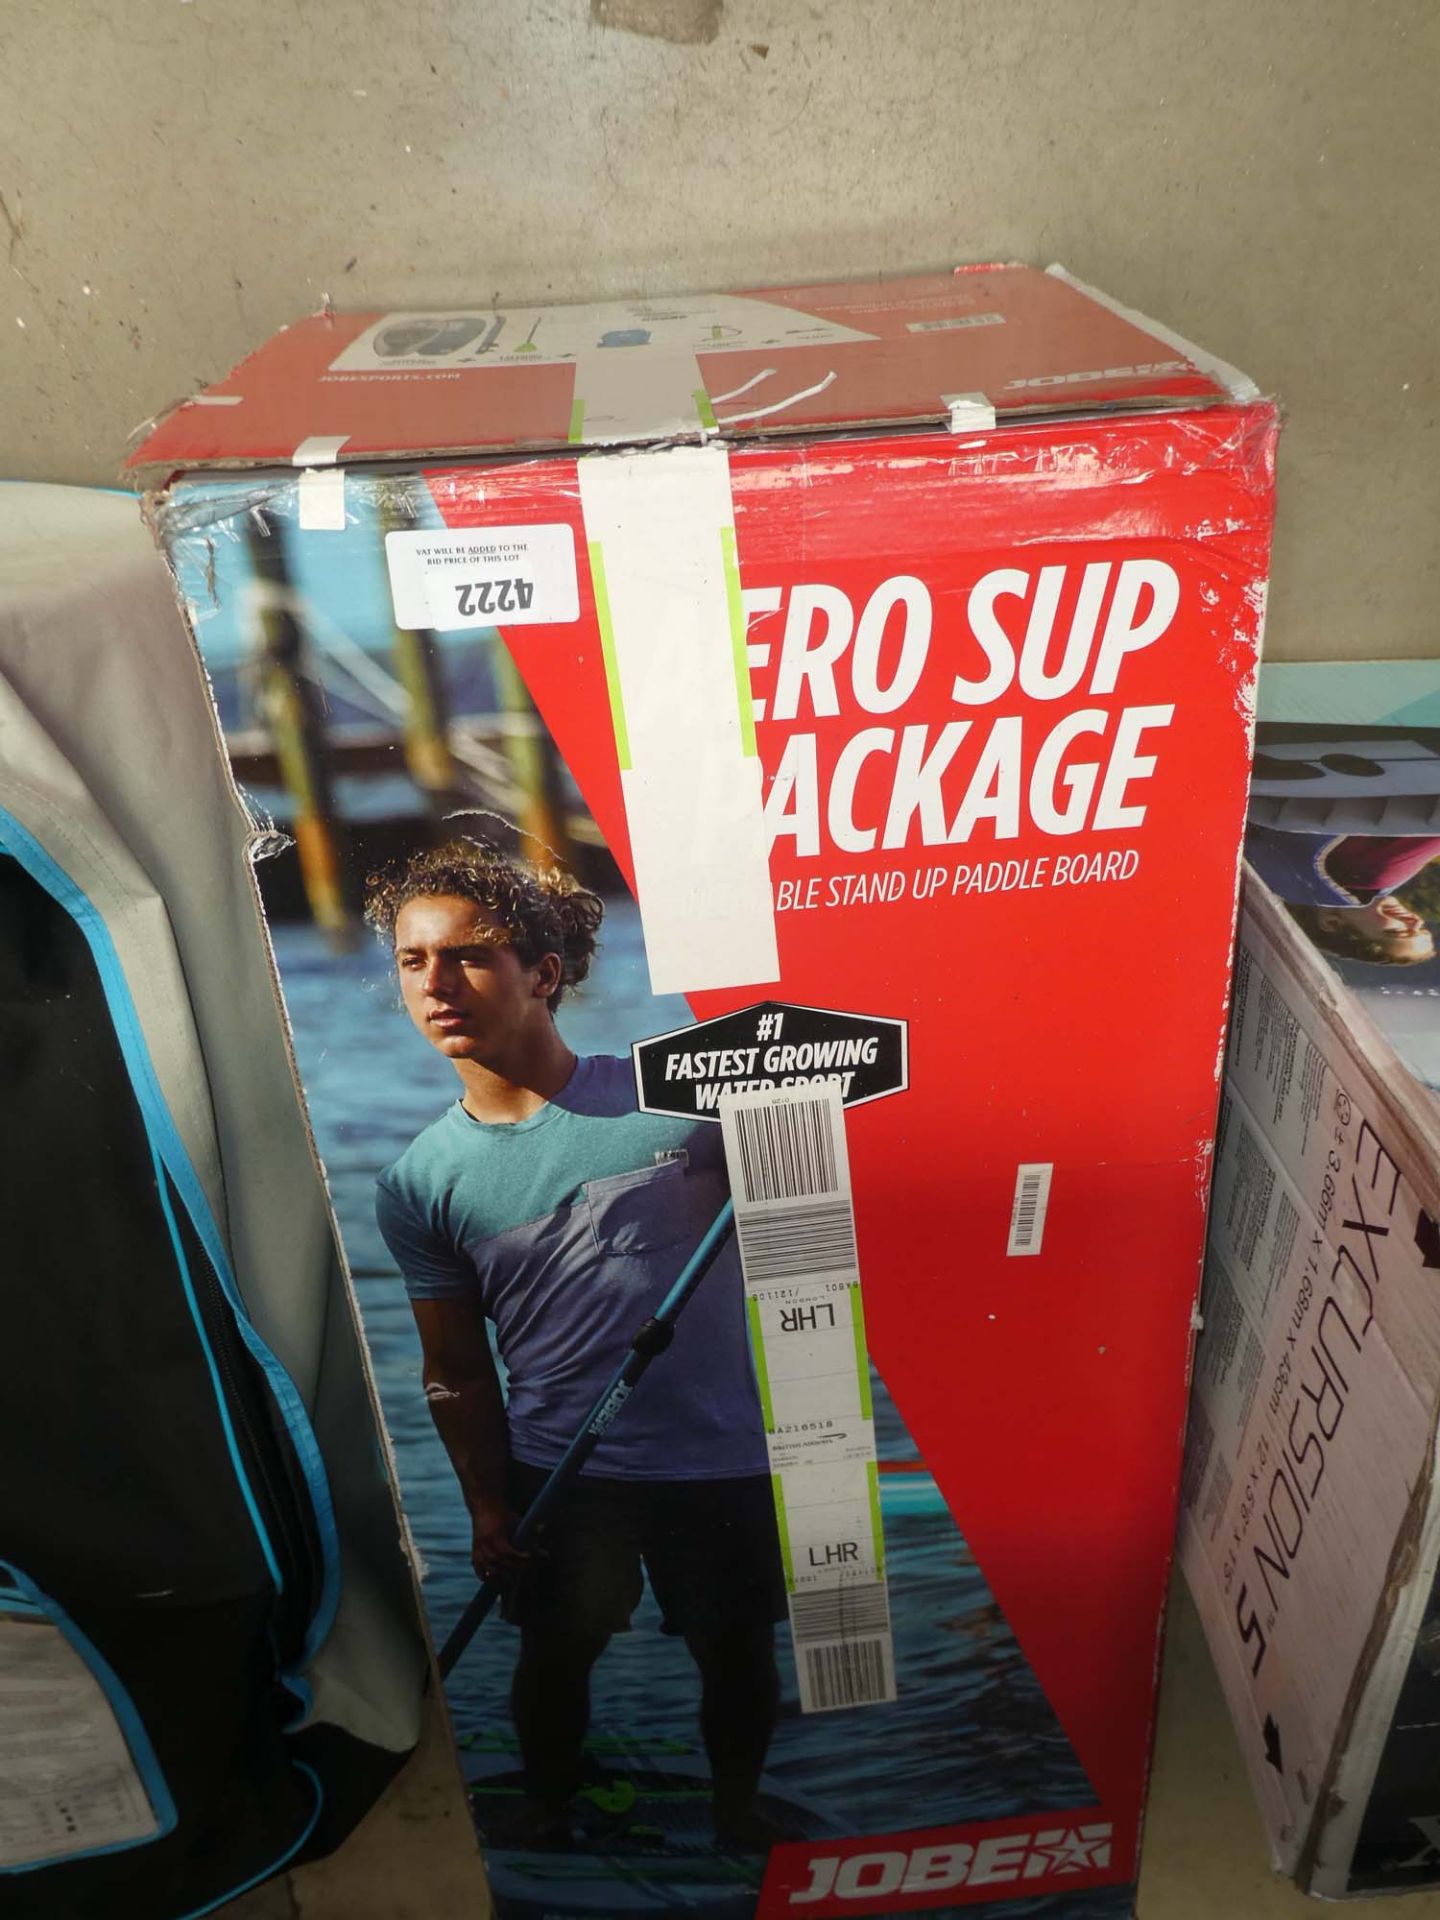 Boxed inflatable paddle board